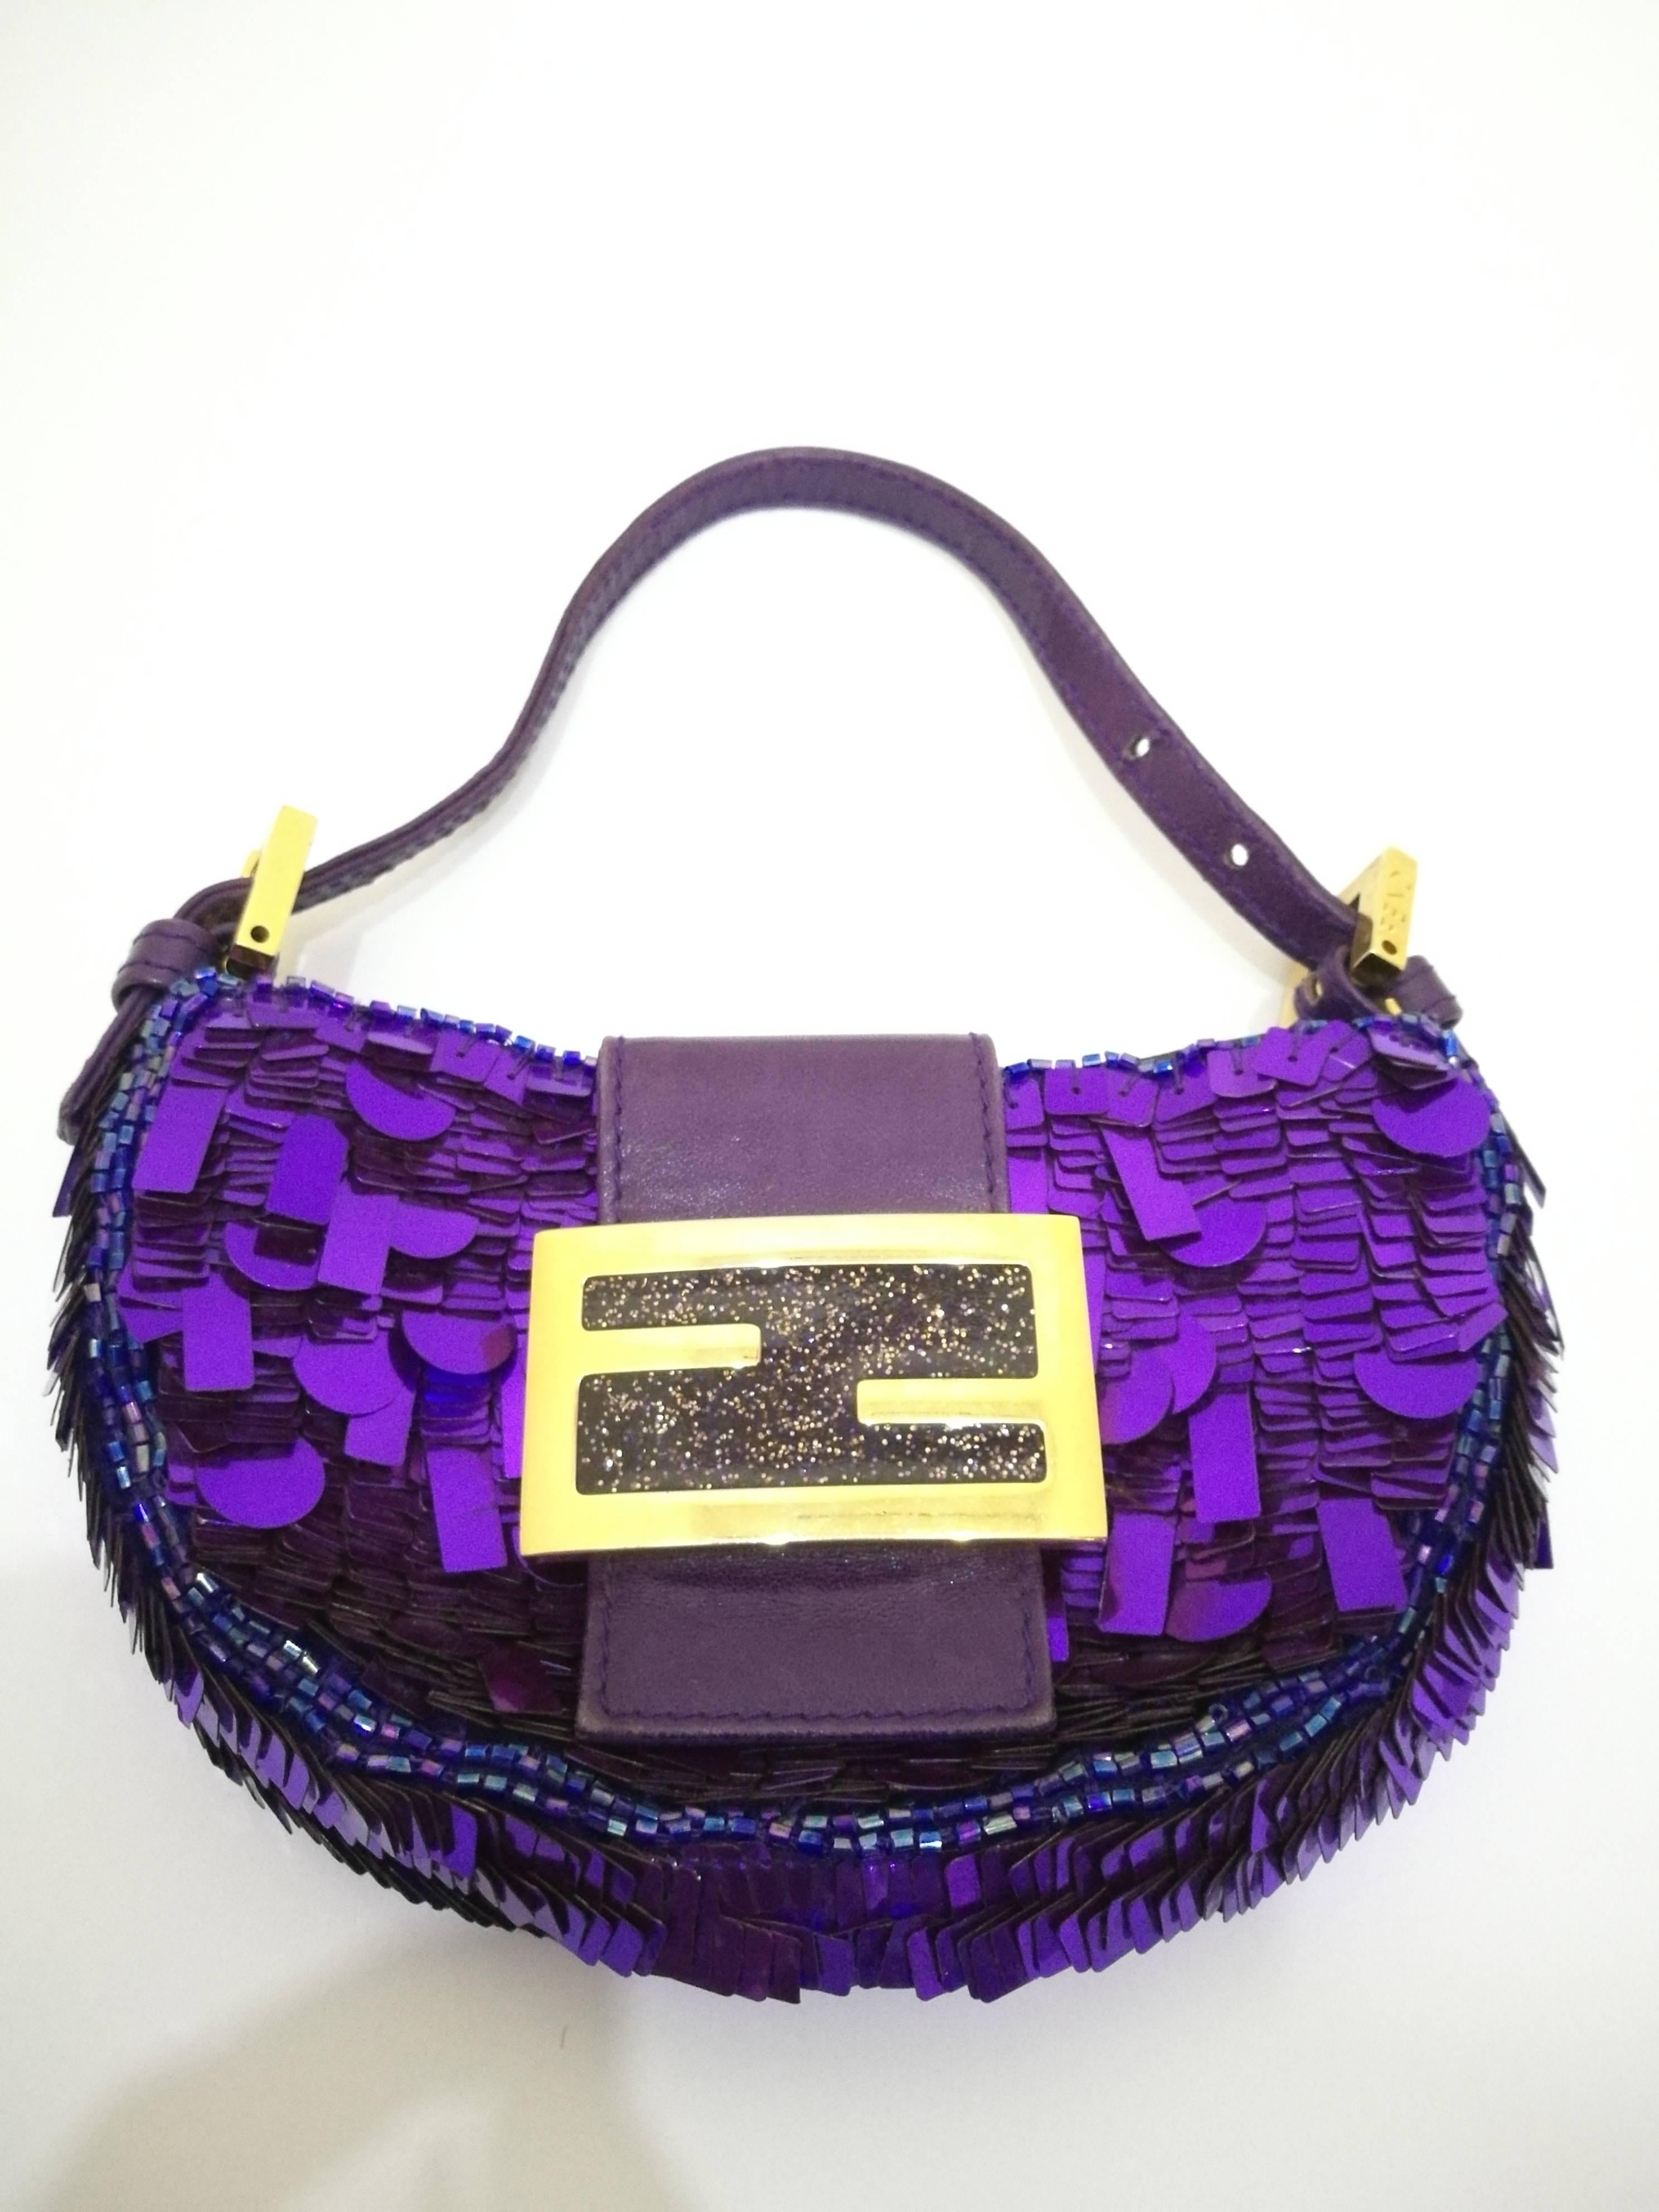 Fendi minaudiere purple sequins
Gold tone hardware
Totally made in italy
Total lenght with handle: 20 cm
Total lenght without handle: 10 cm